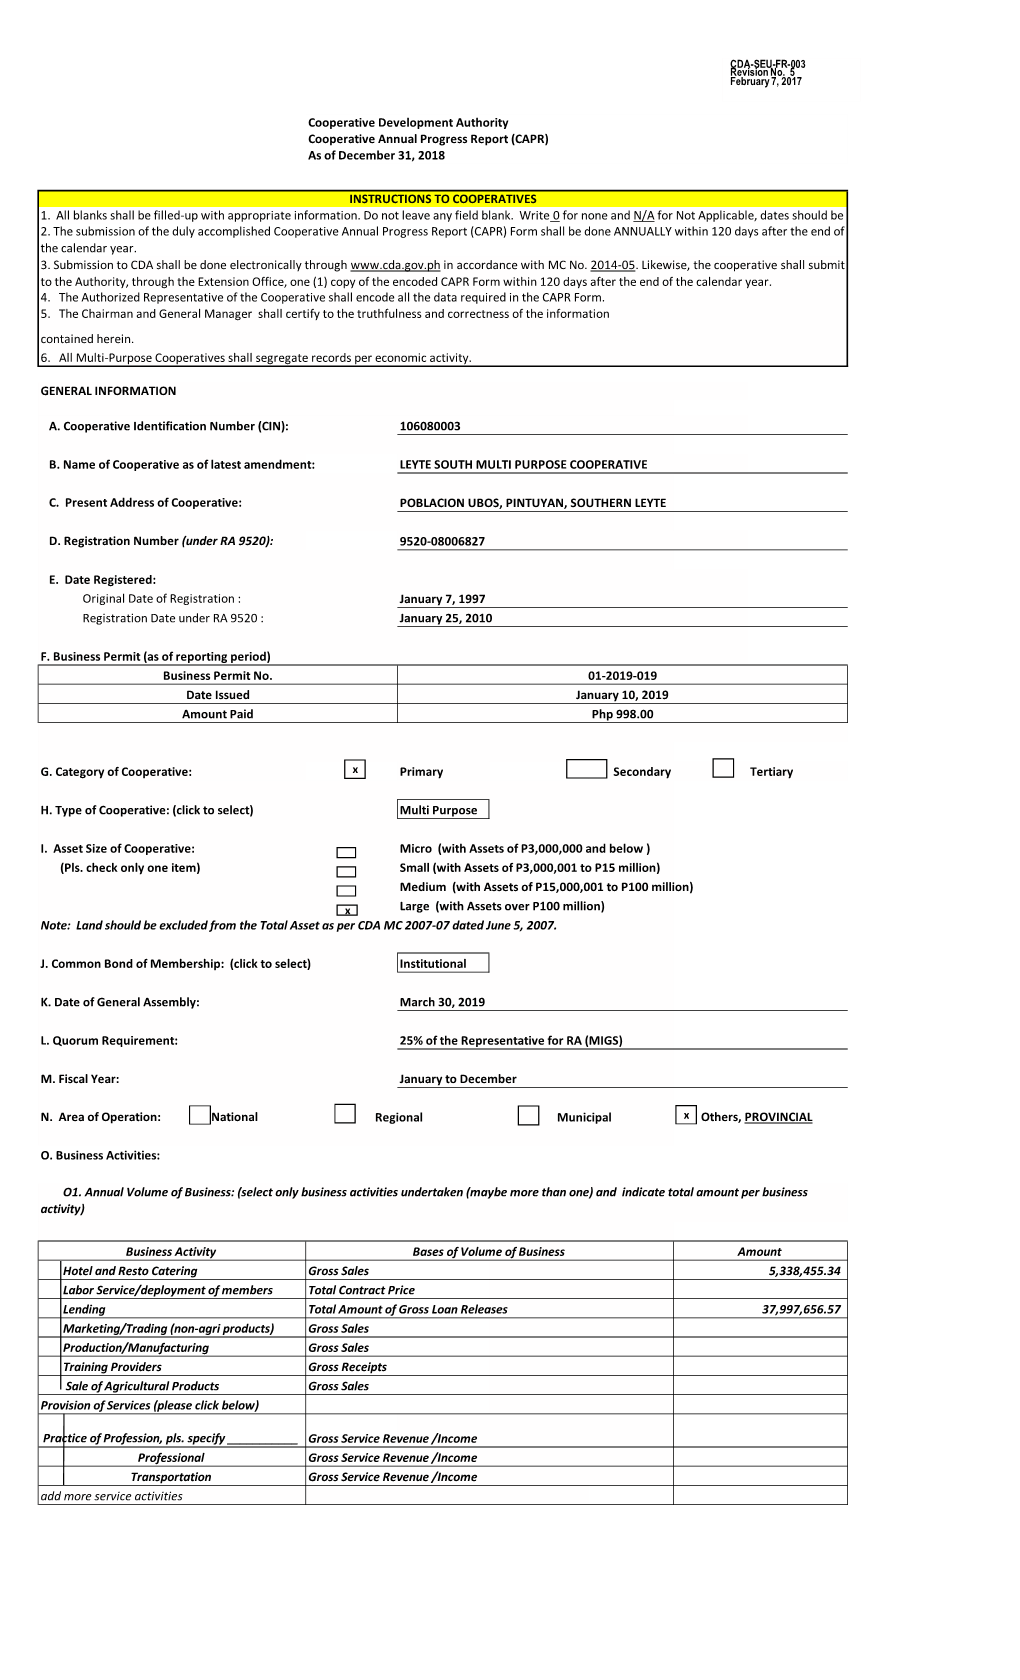 A. Cooperative Identification Number (CIN): 106080003